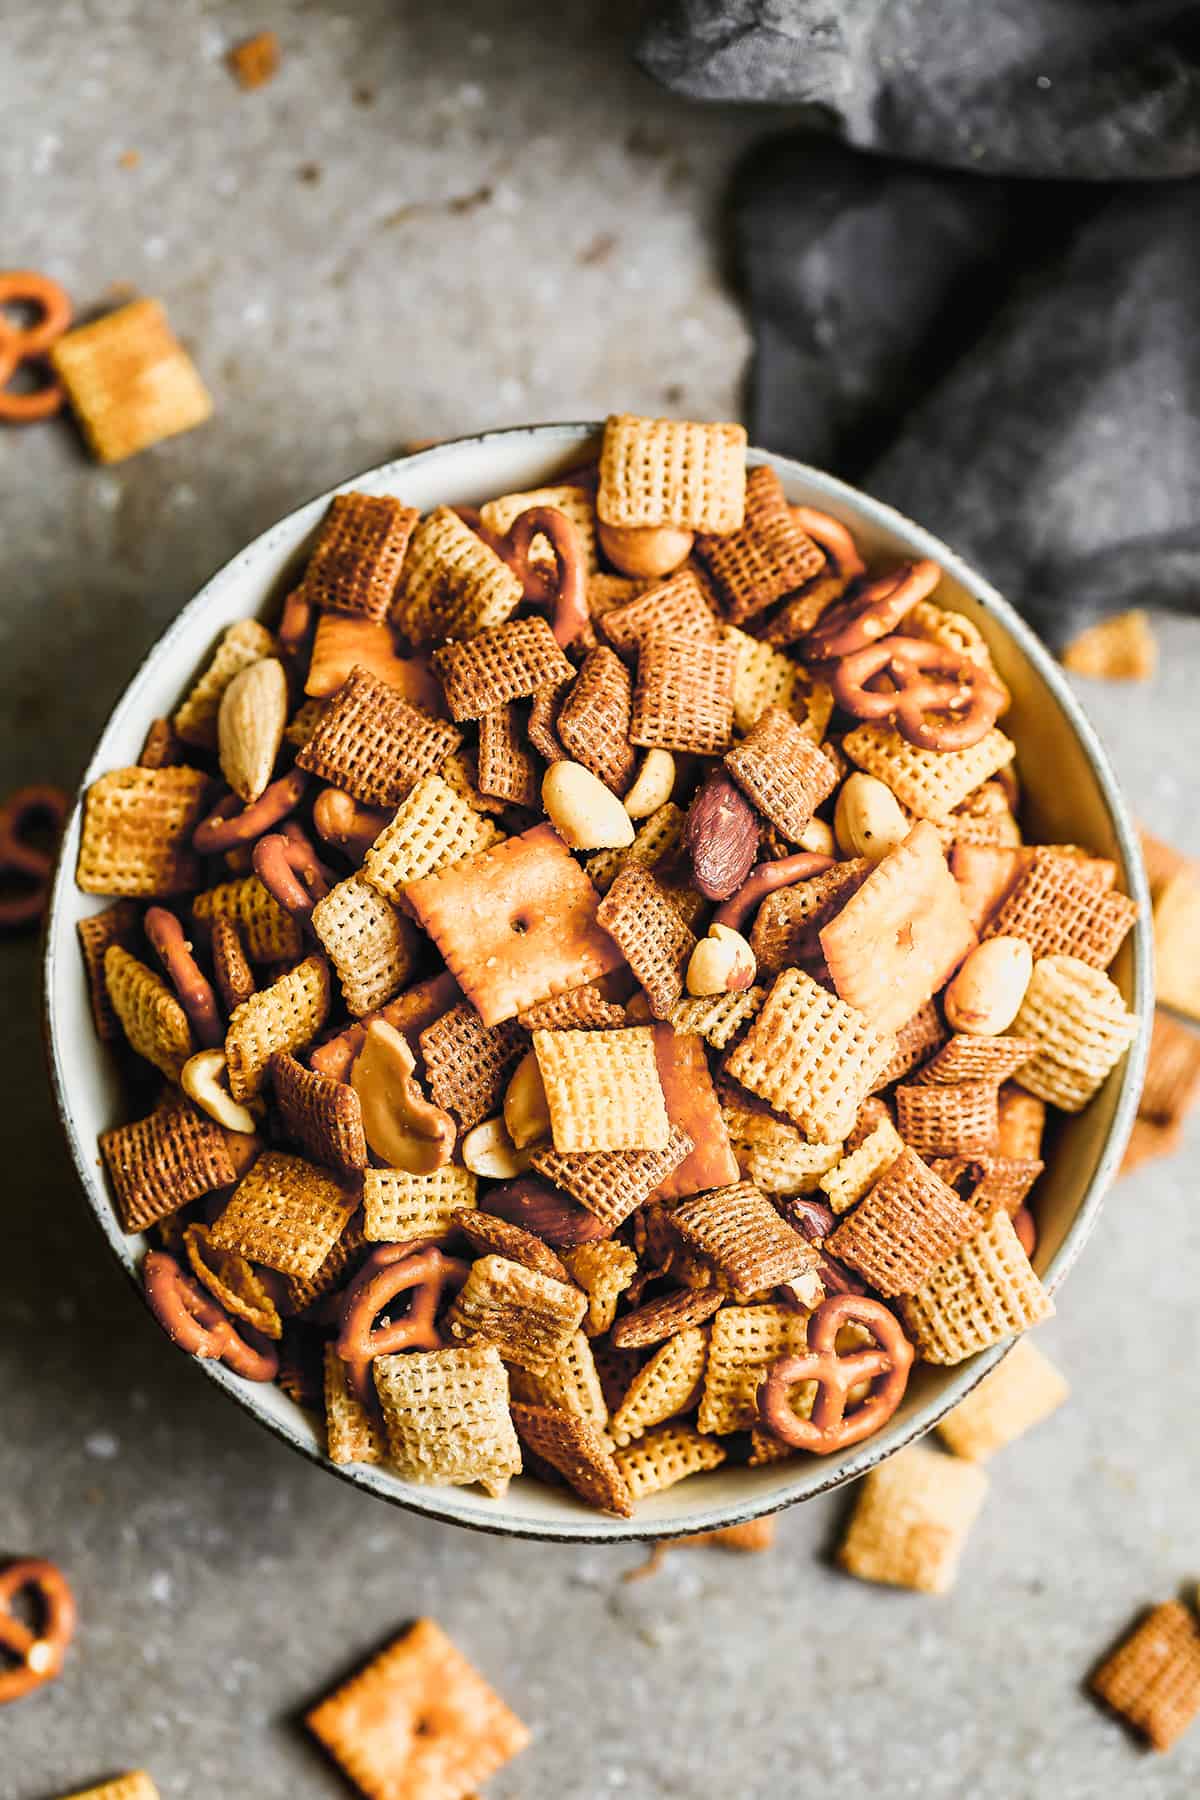 A bowl of homemade Chex Mix ready to take to a party and share.